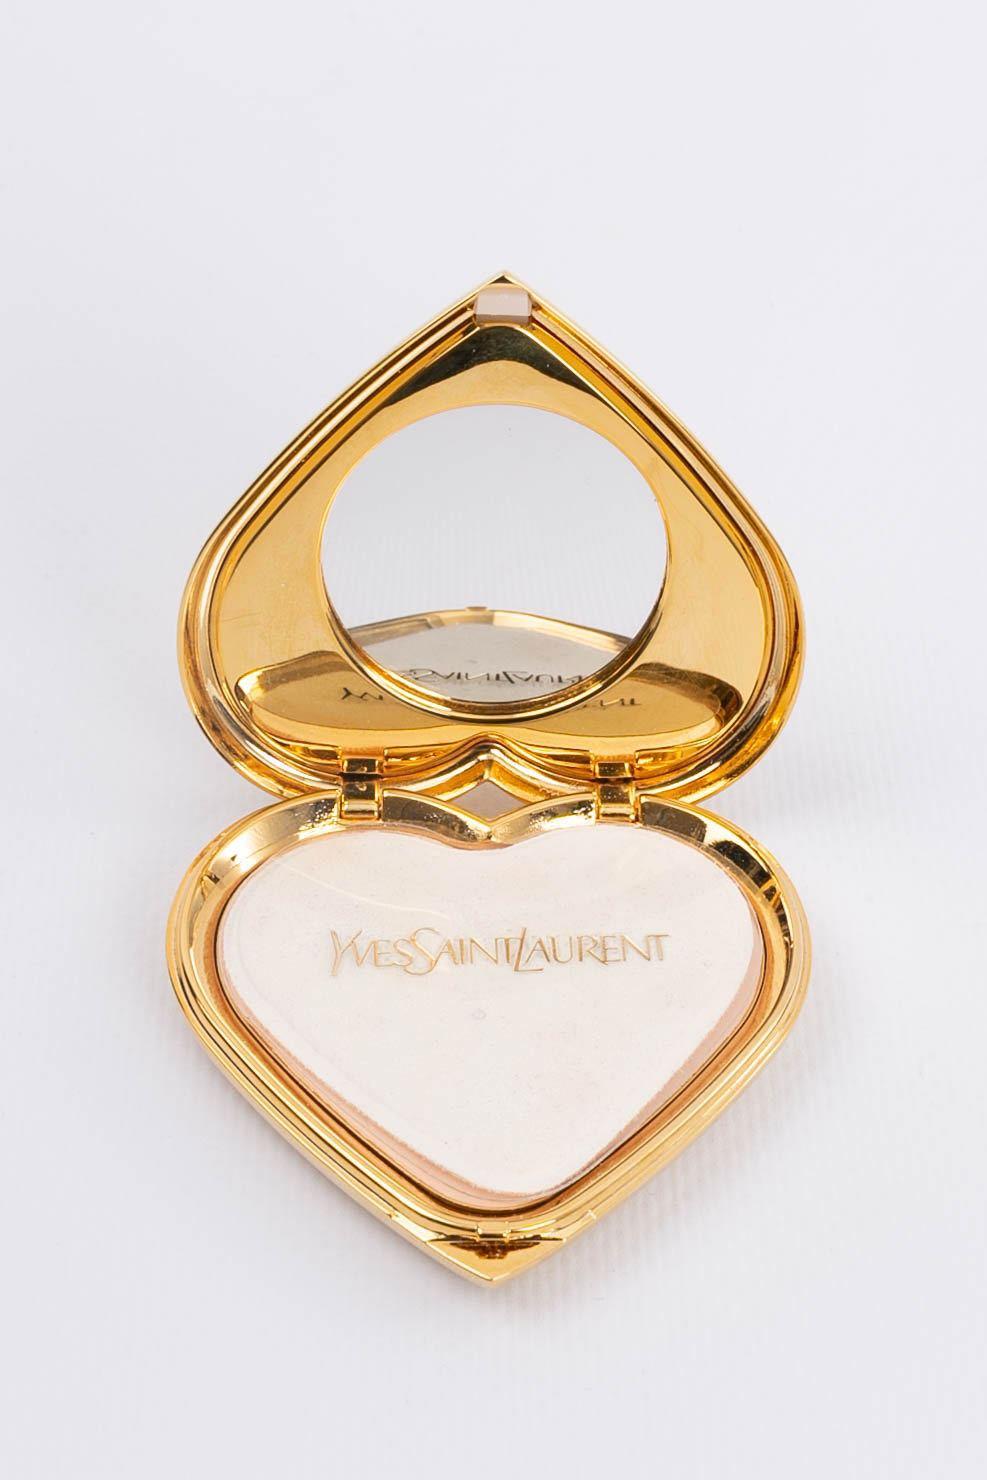 Women's Yves Saint Laurent Gilded Metal Compact in Heart Shape For Sale